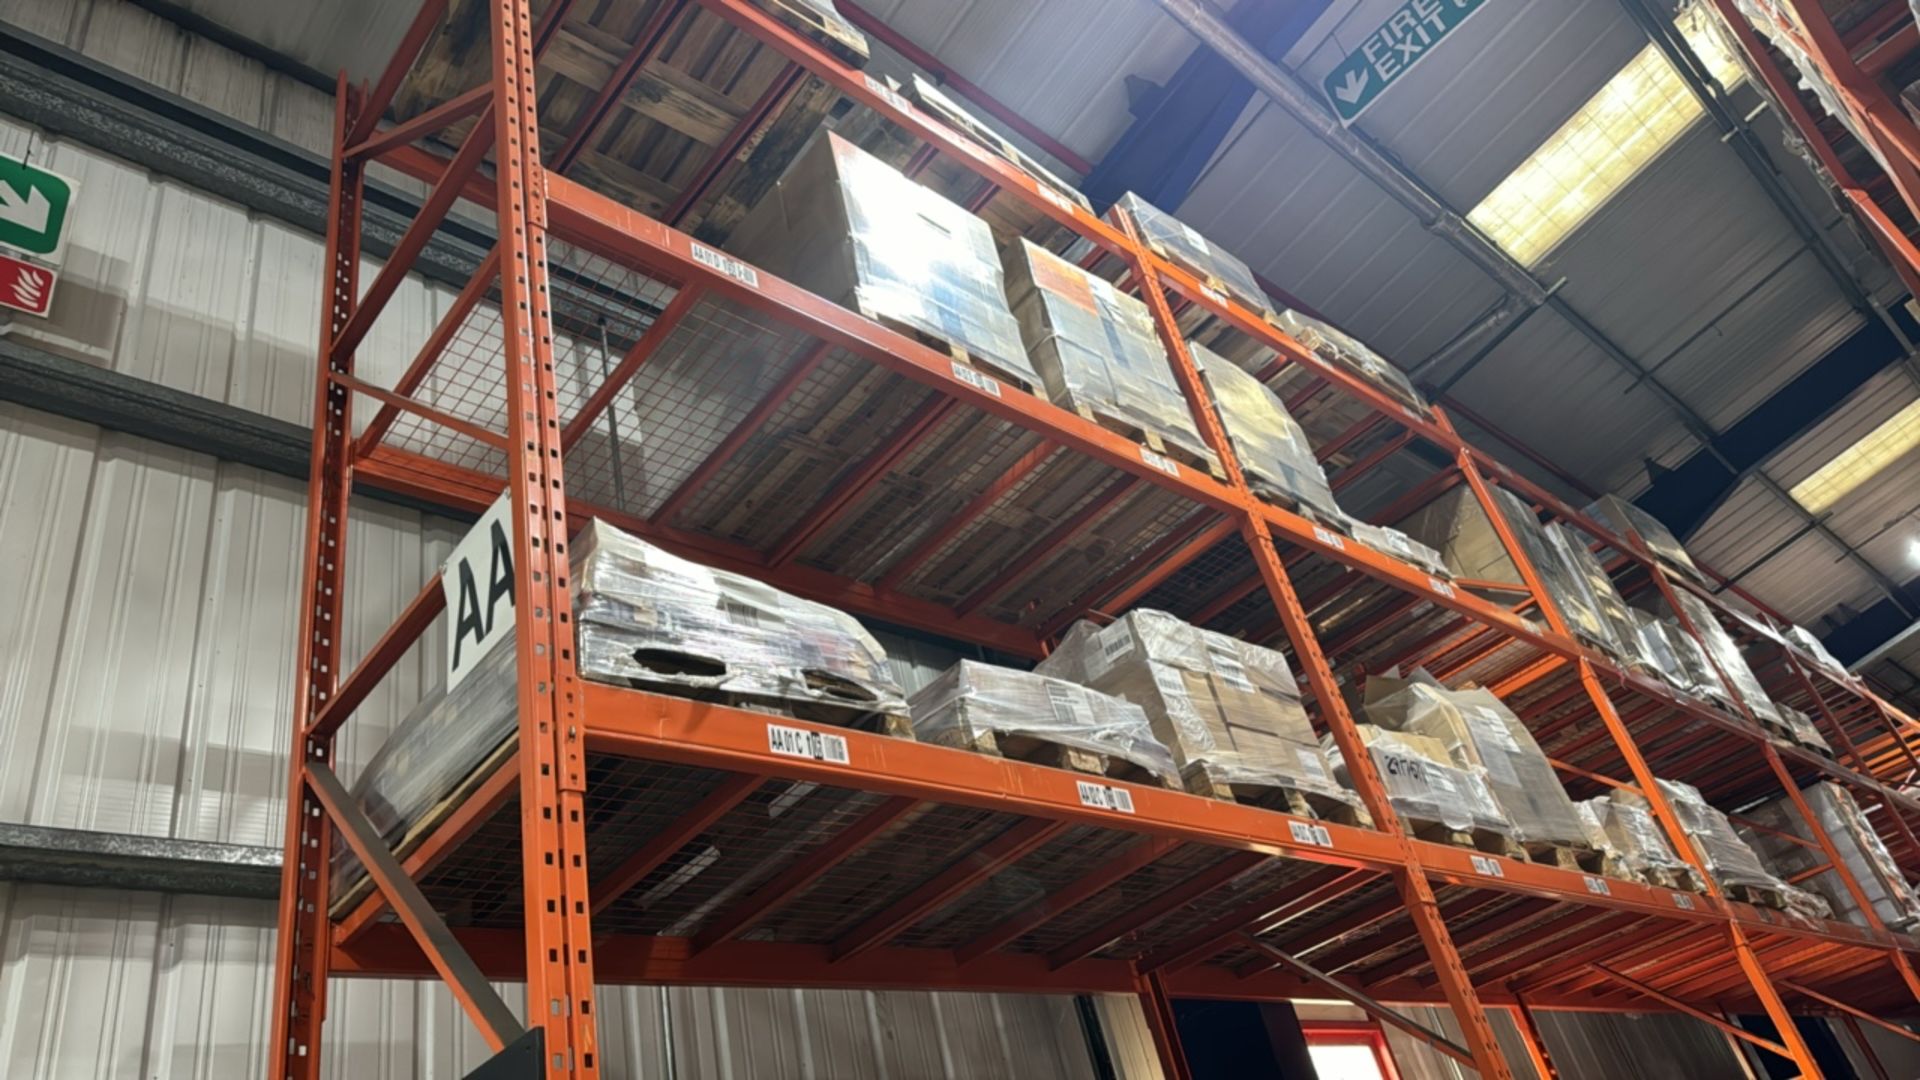 23 Bays Of Boltless Pallet Racking - Image 6 of 10